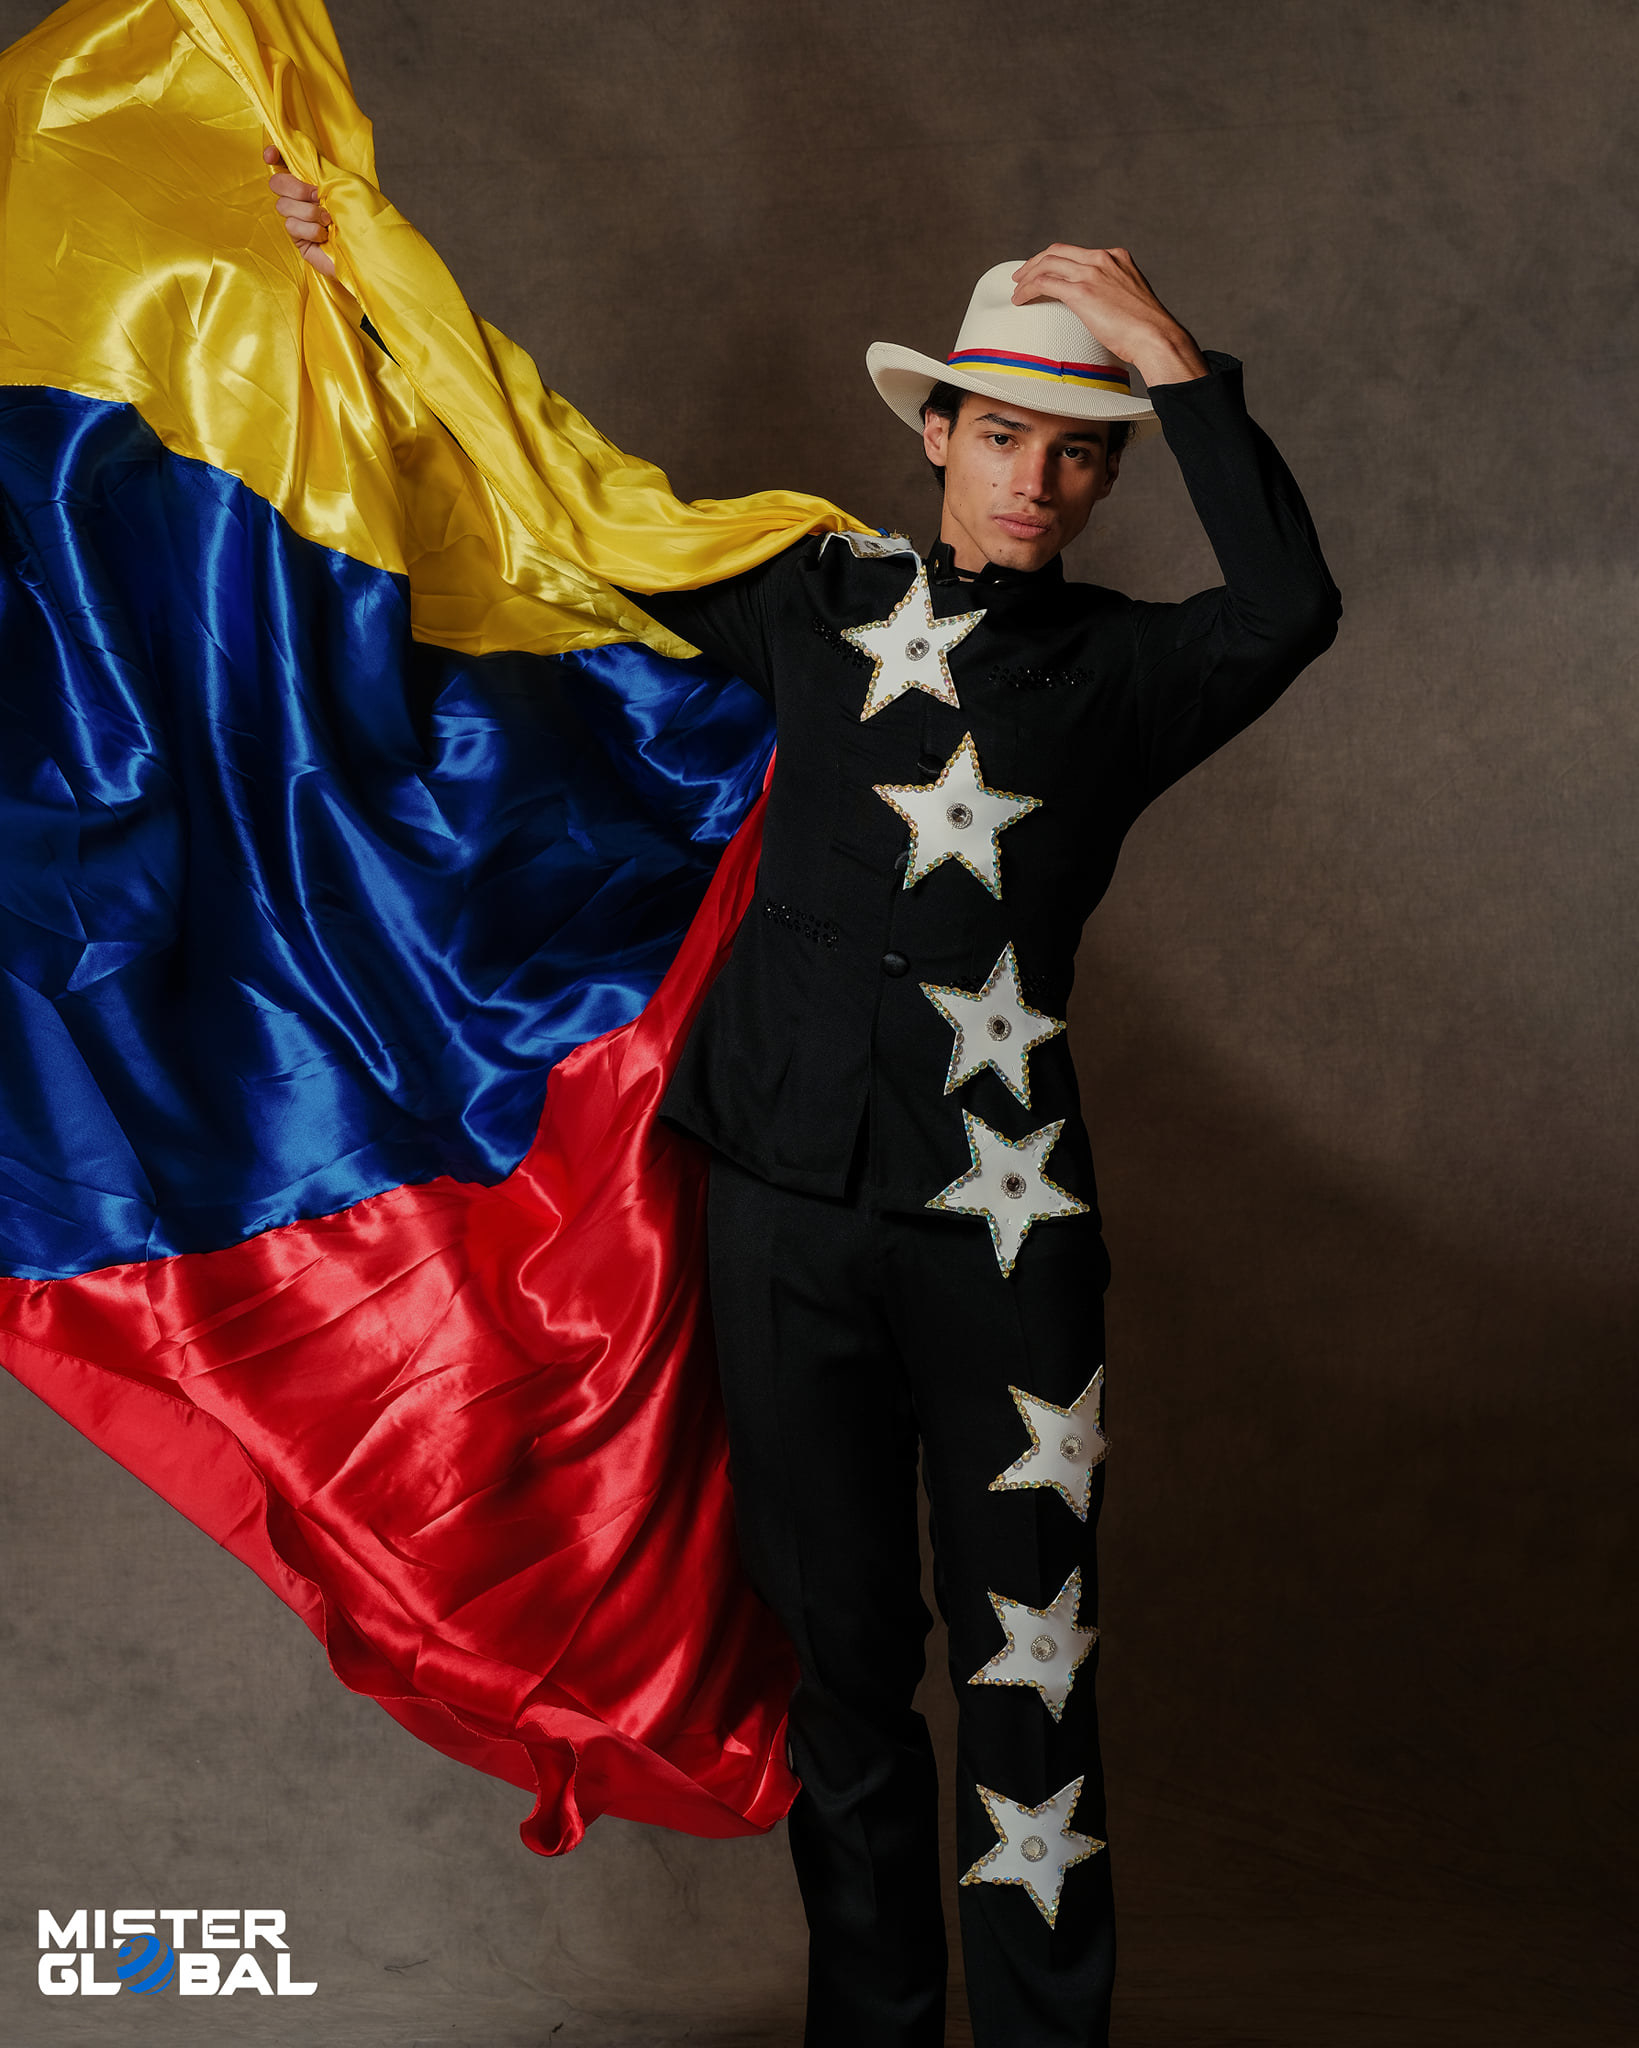 Man wearing a brimmed hat, a cape with the colors of the Venezuelan flag, and a jacket and pants with stars extending from the jacket and down one leg